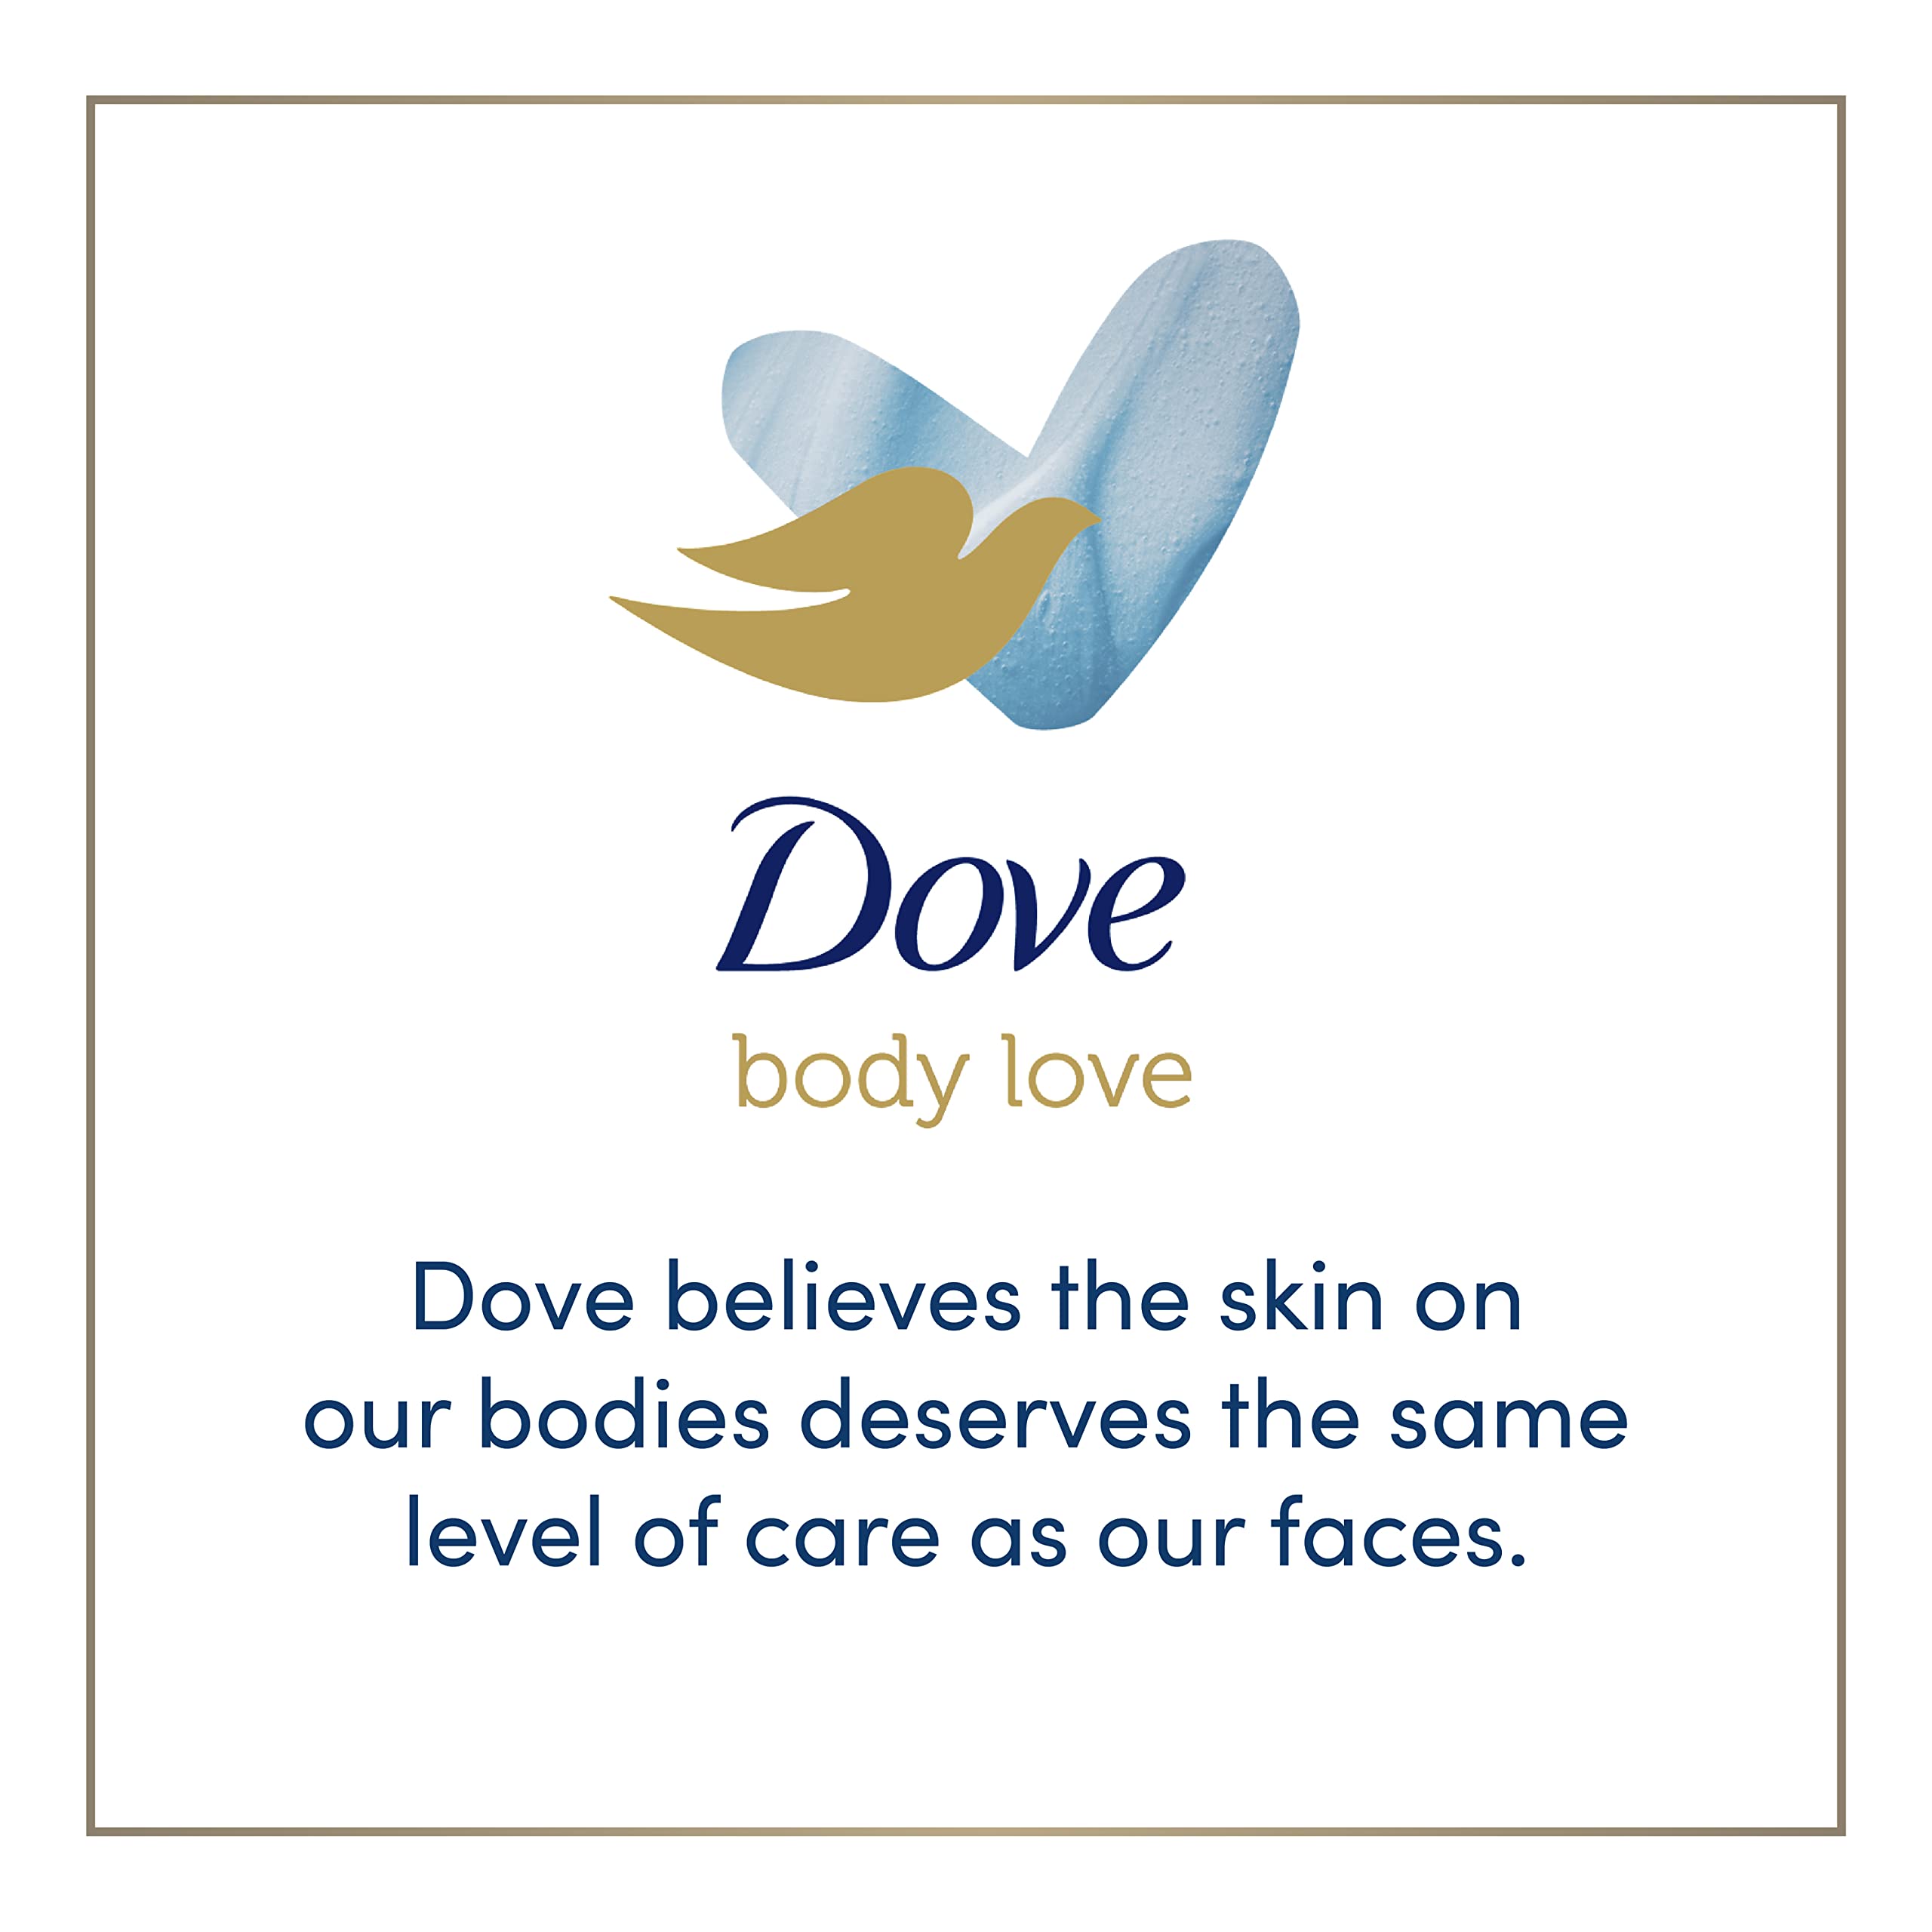 Dove Body Love Body Cleanser Moisture Boost 3 Count For Dry Skin Body Wash with Hyaluronic Acid and Moringa Oil 17.5 fl oz